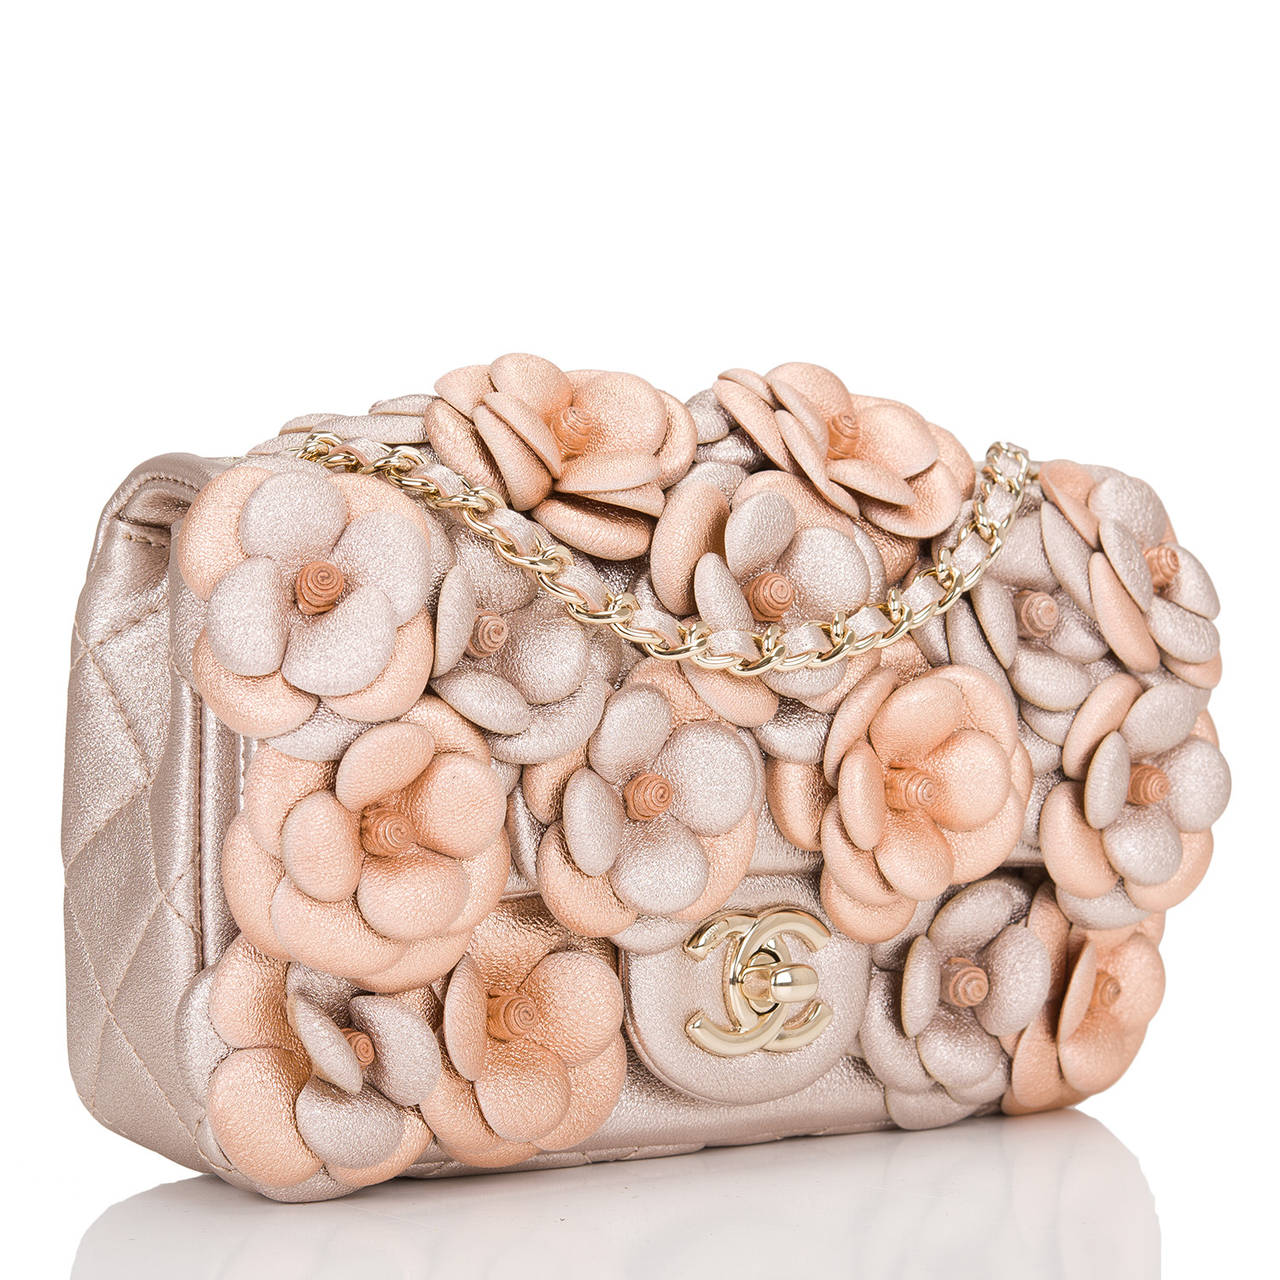 This Chanel Camellia flap bag featuring beautiful hand stitched pink and silver leather camellia flowers is fast becoming a collectible amongst Chanel lovers. This gorgeous Chanel bag features a front flap with signature gold tone CC turnlock